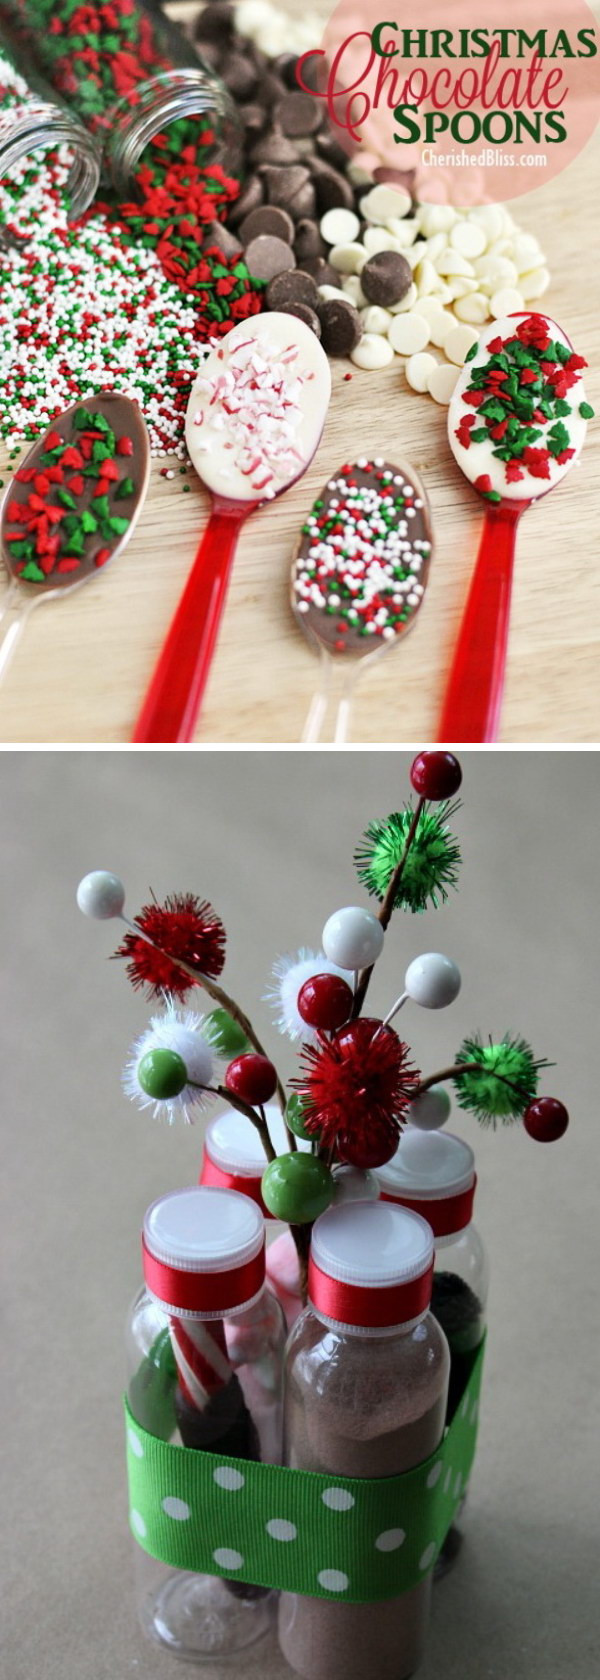 Awesome DIY Gifts
 20 Awesome DIY Christmas Gift Ideas & Tutorials